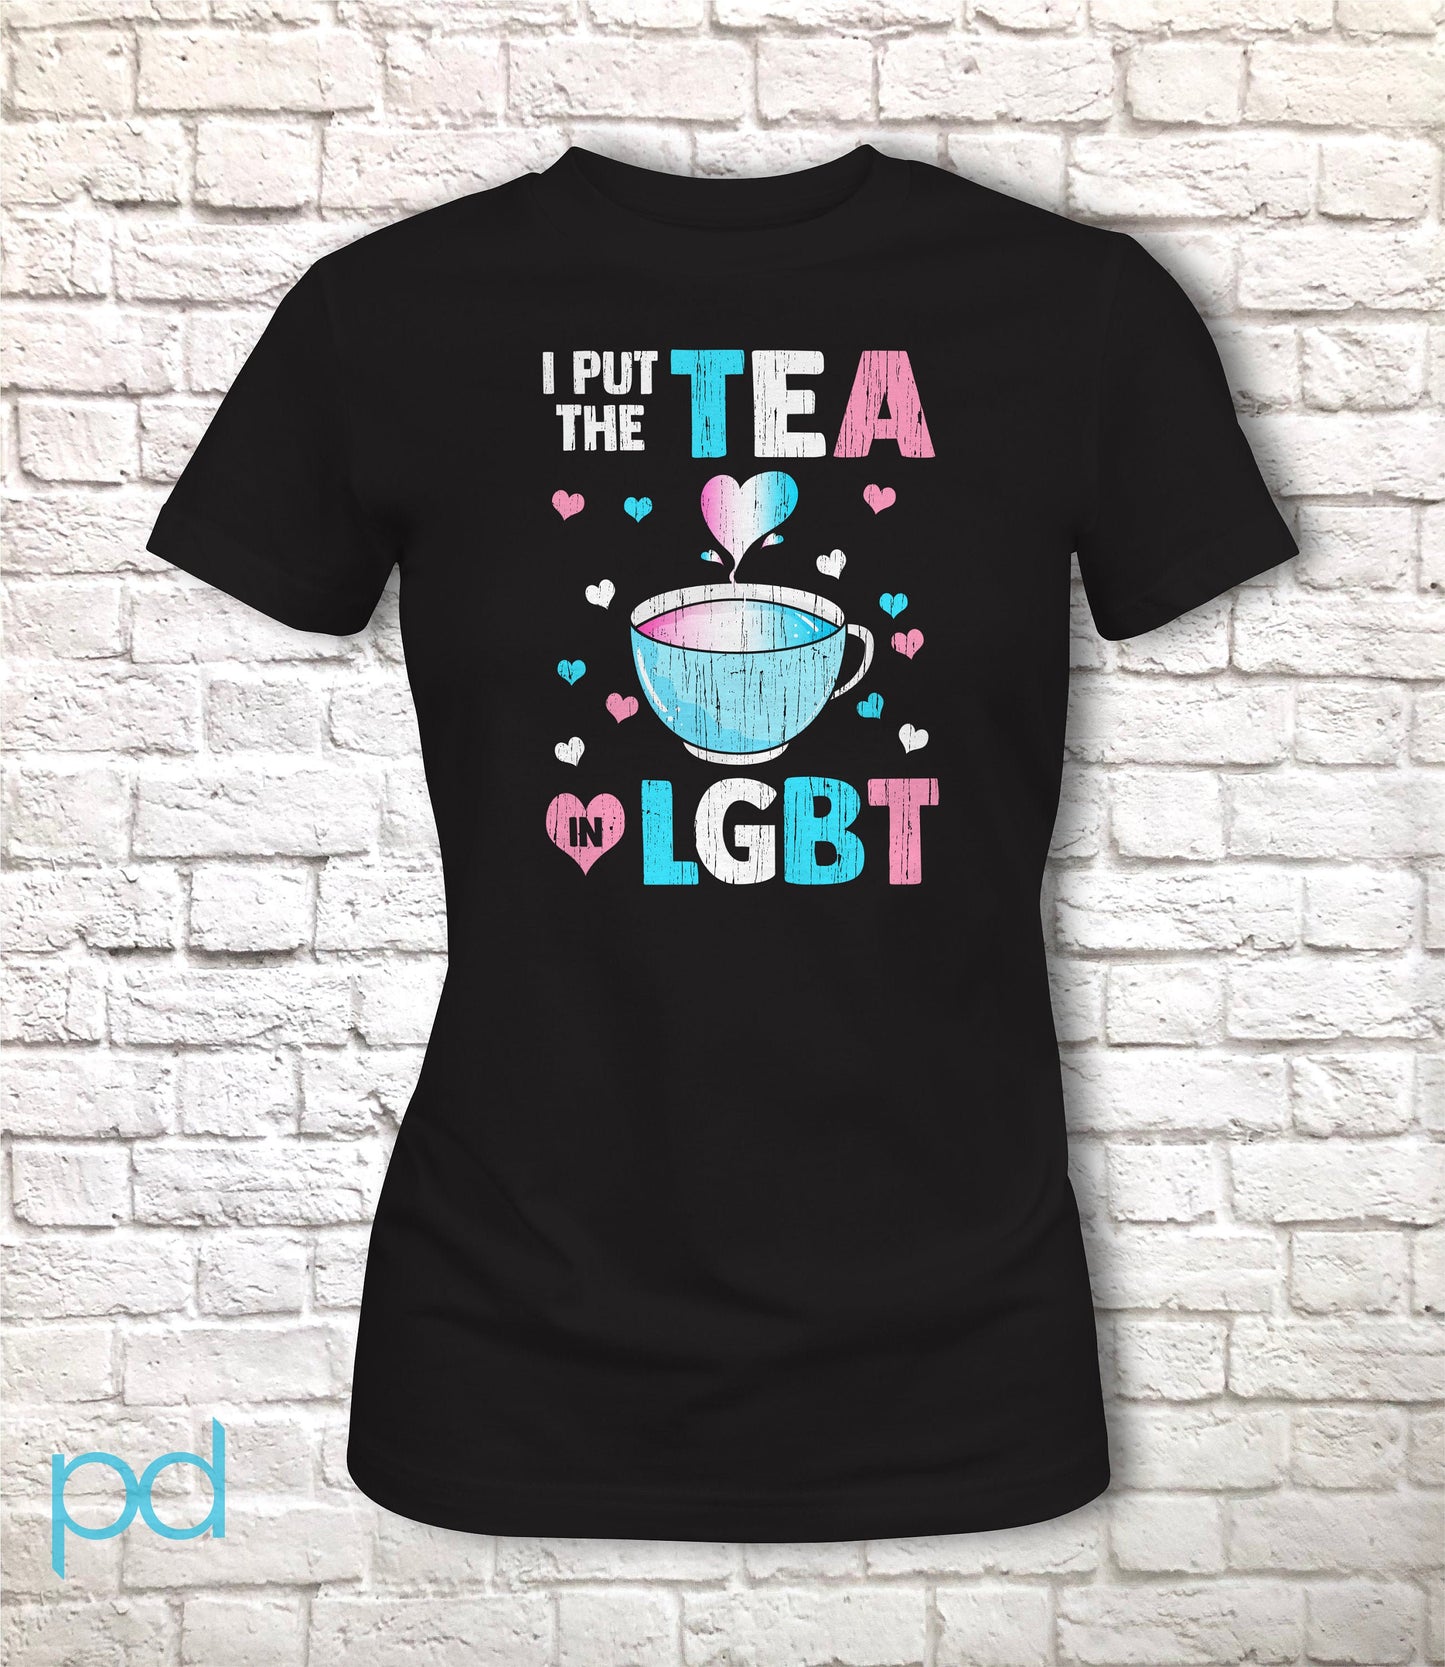 I Put The Tea In LGBT Shirt Fitted Cut Style, Funny Trans Gift Idea, Humorous Transgender Tea Pun Fitted Tee T-Shirt Top